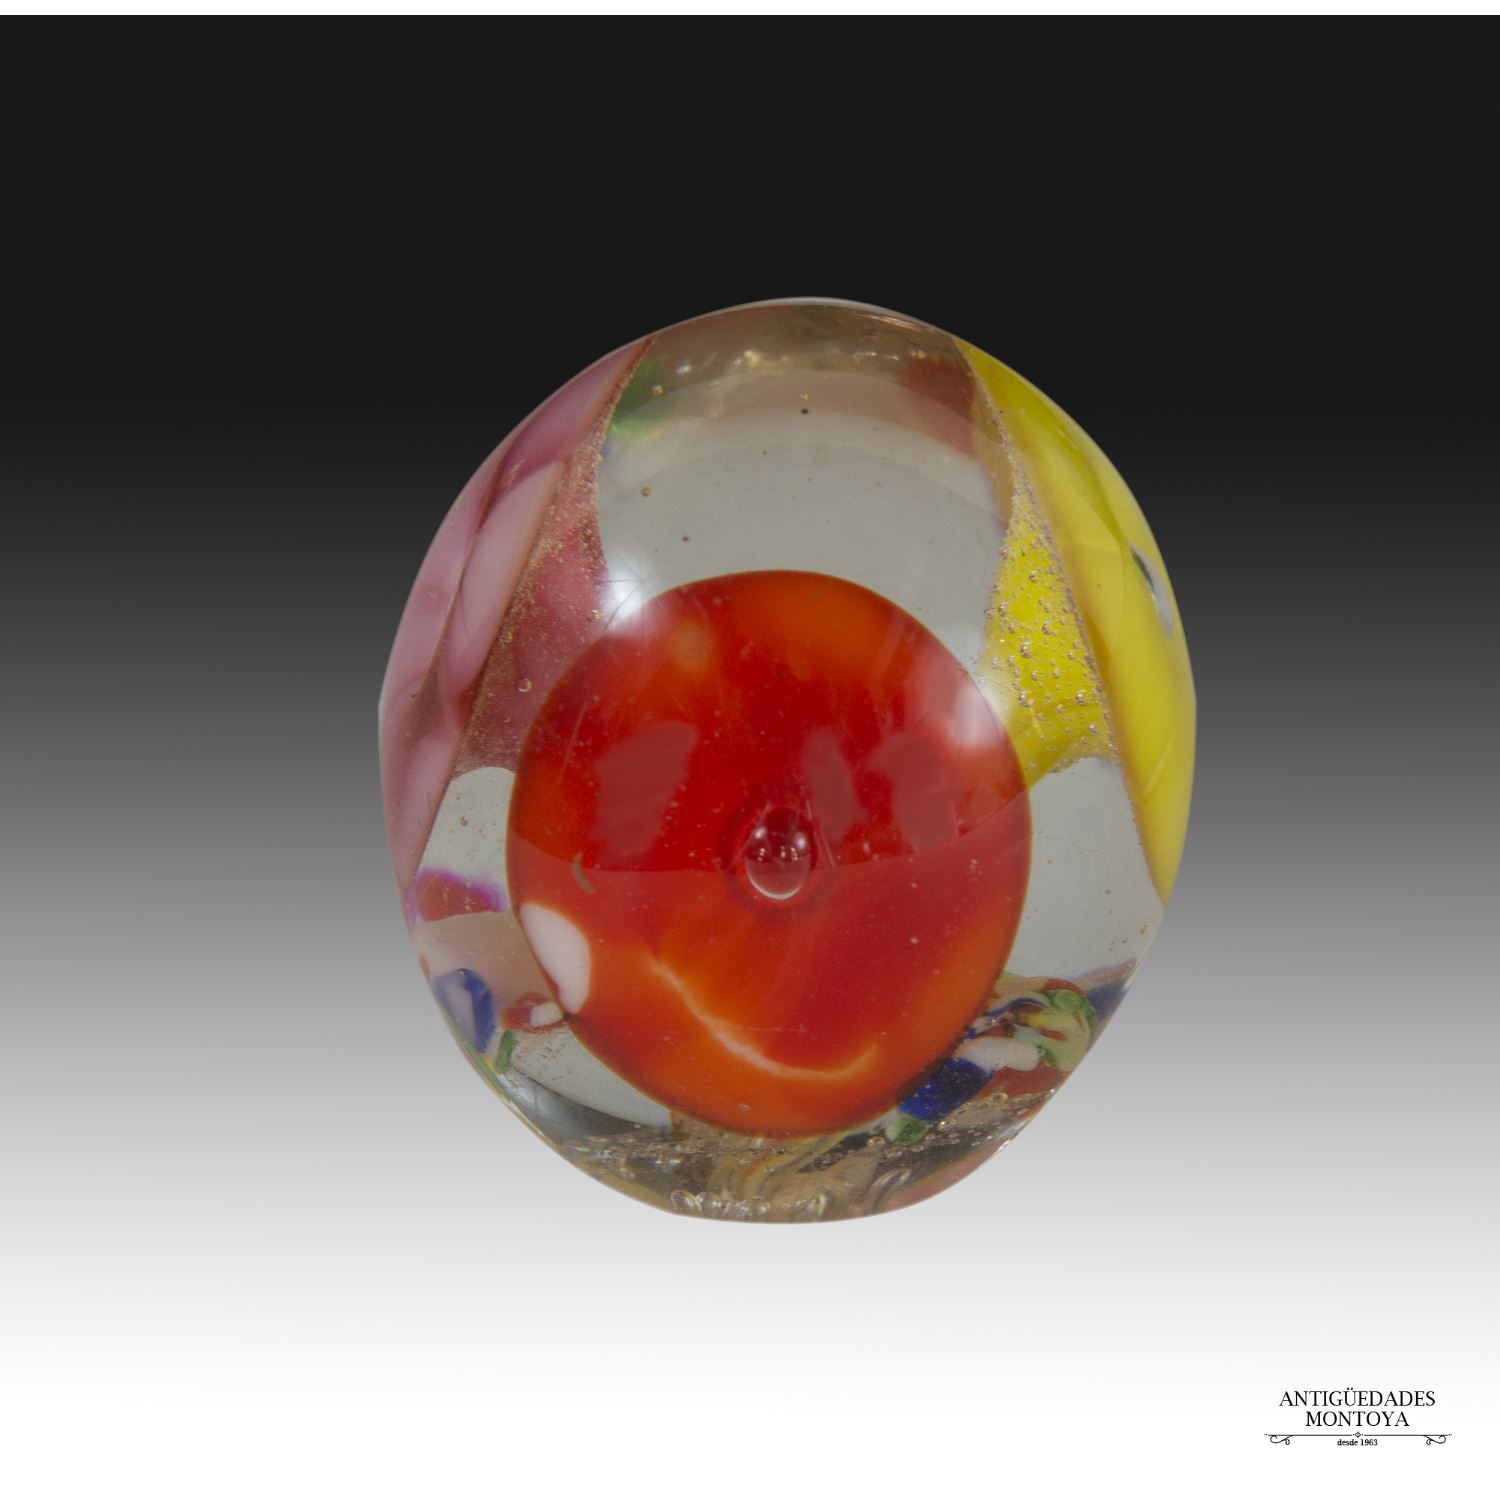 Colored paperweight